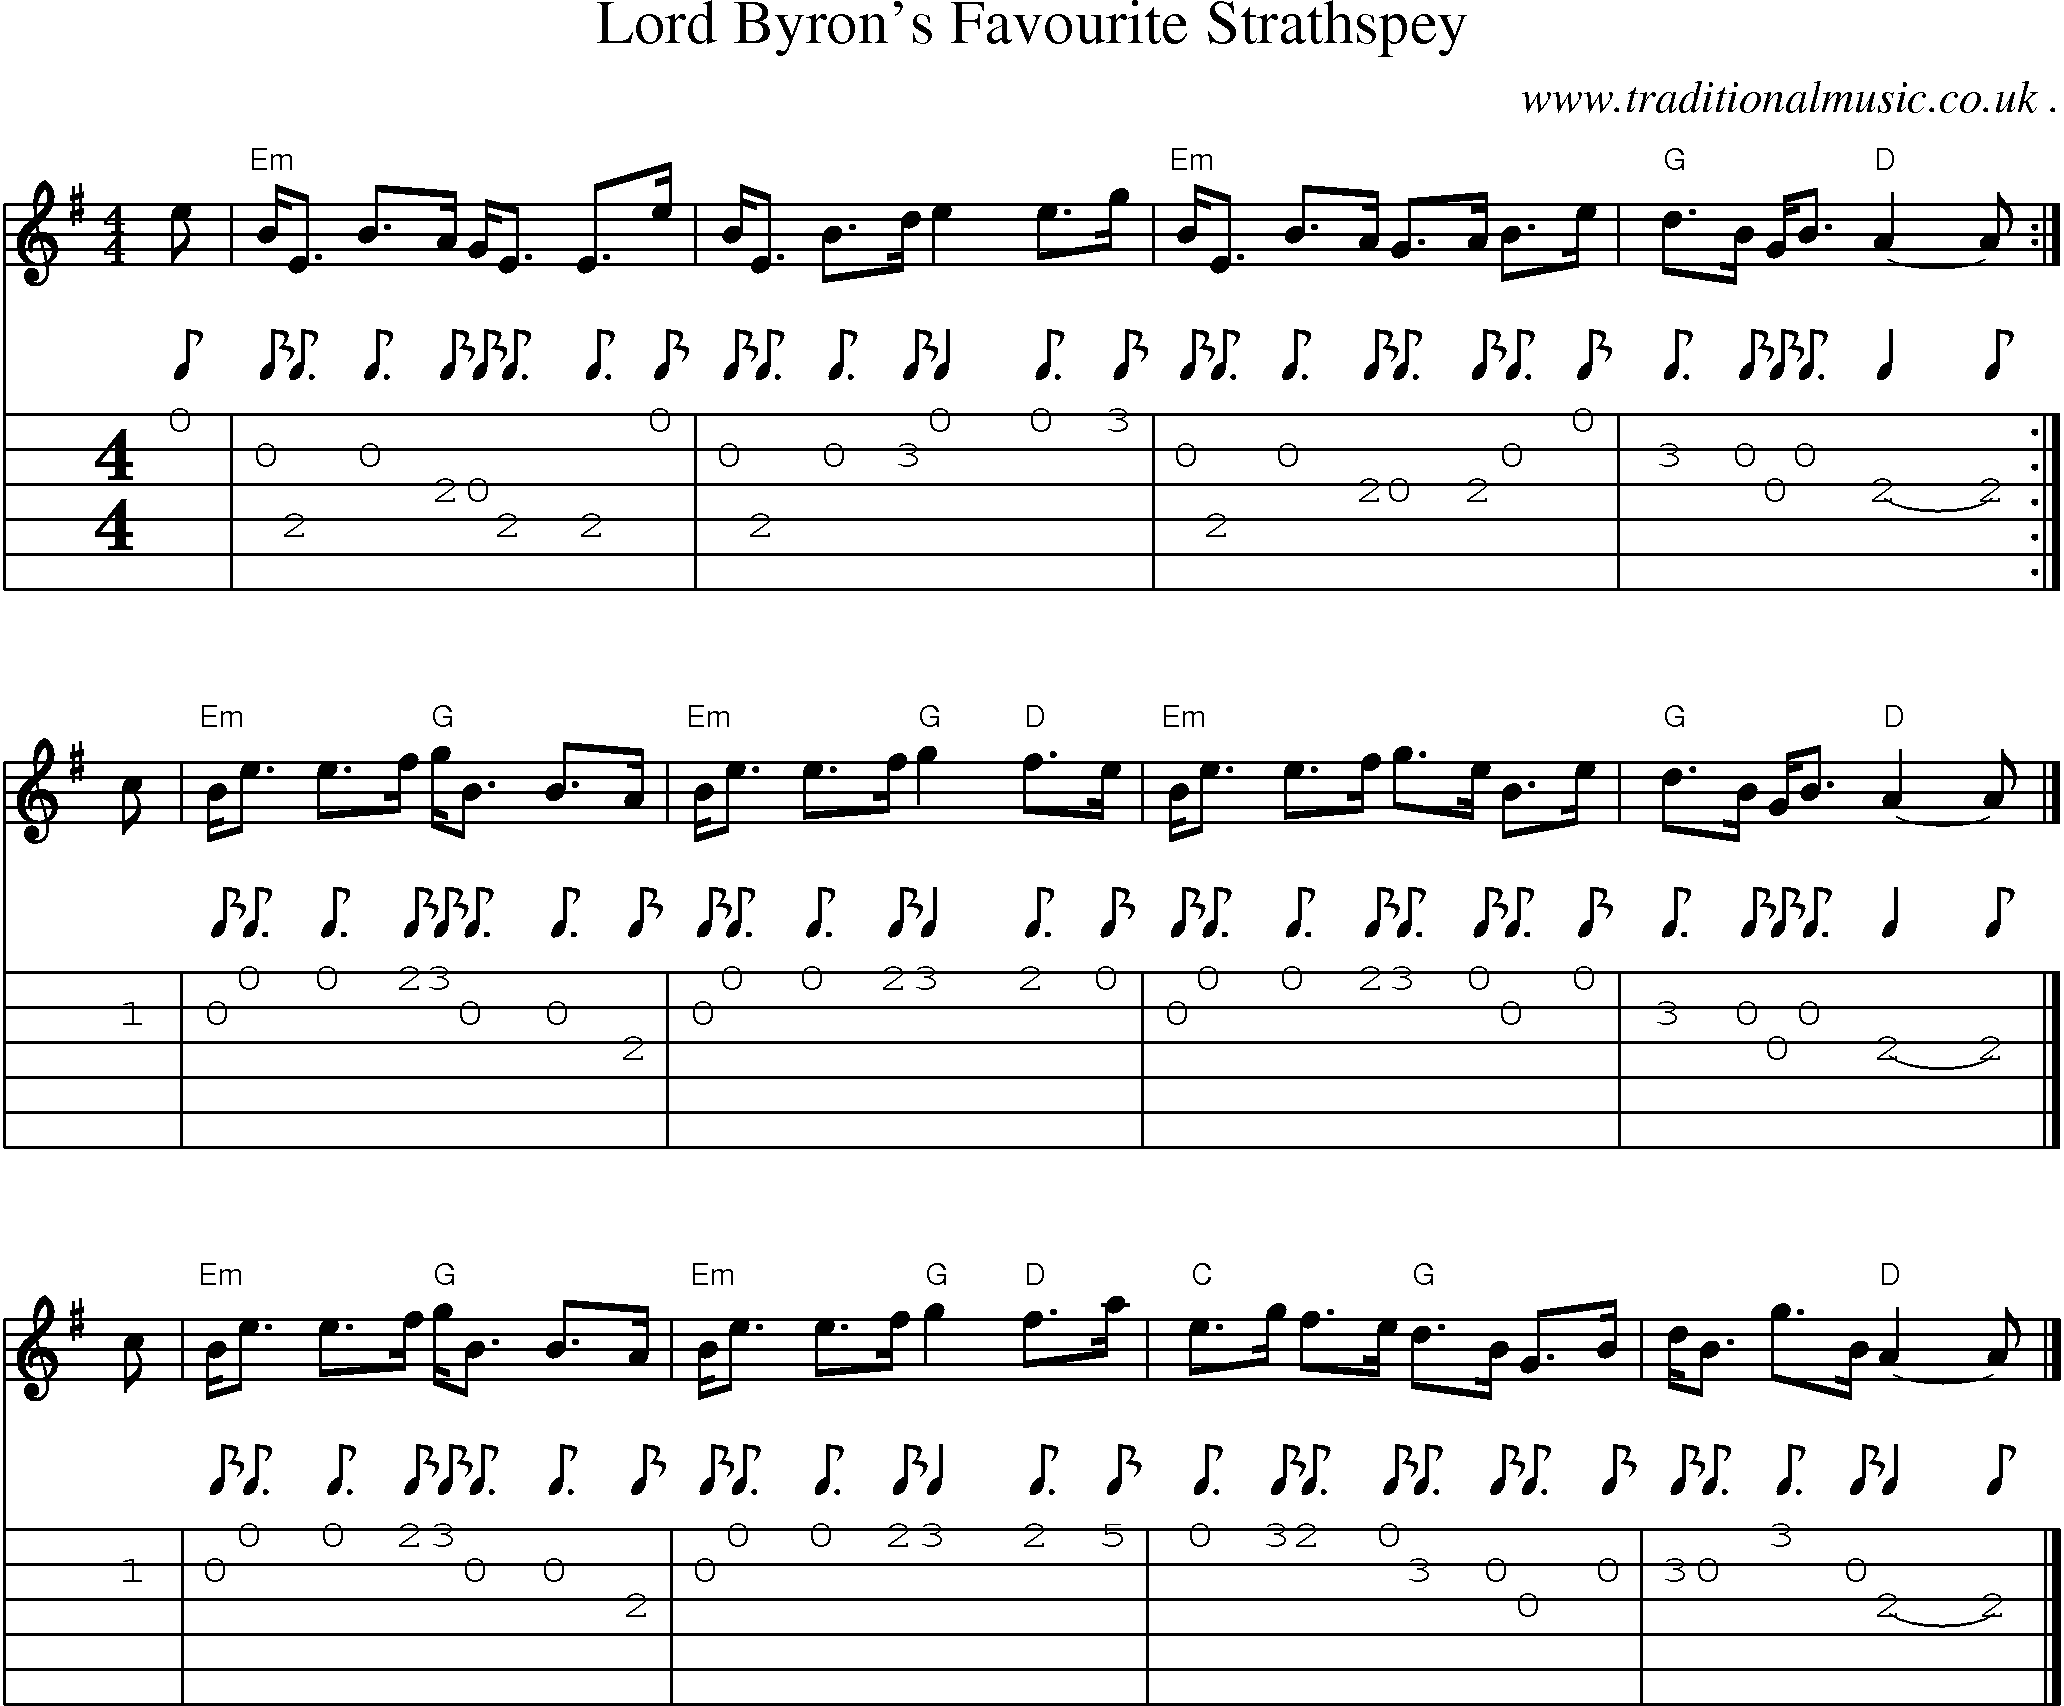 Sheet-music  score, Chords and Guitar Tabs for Lord Byrons Favourite Strathspey